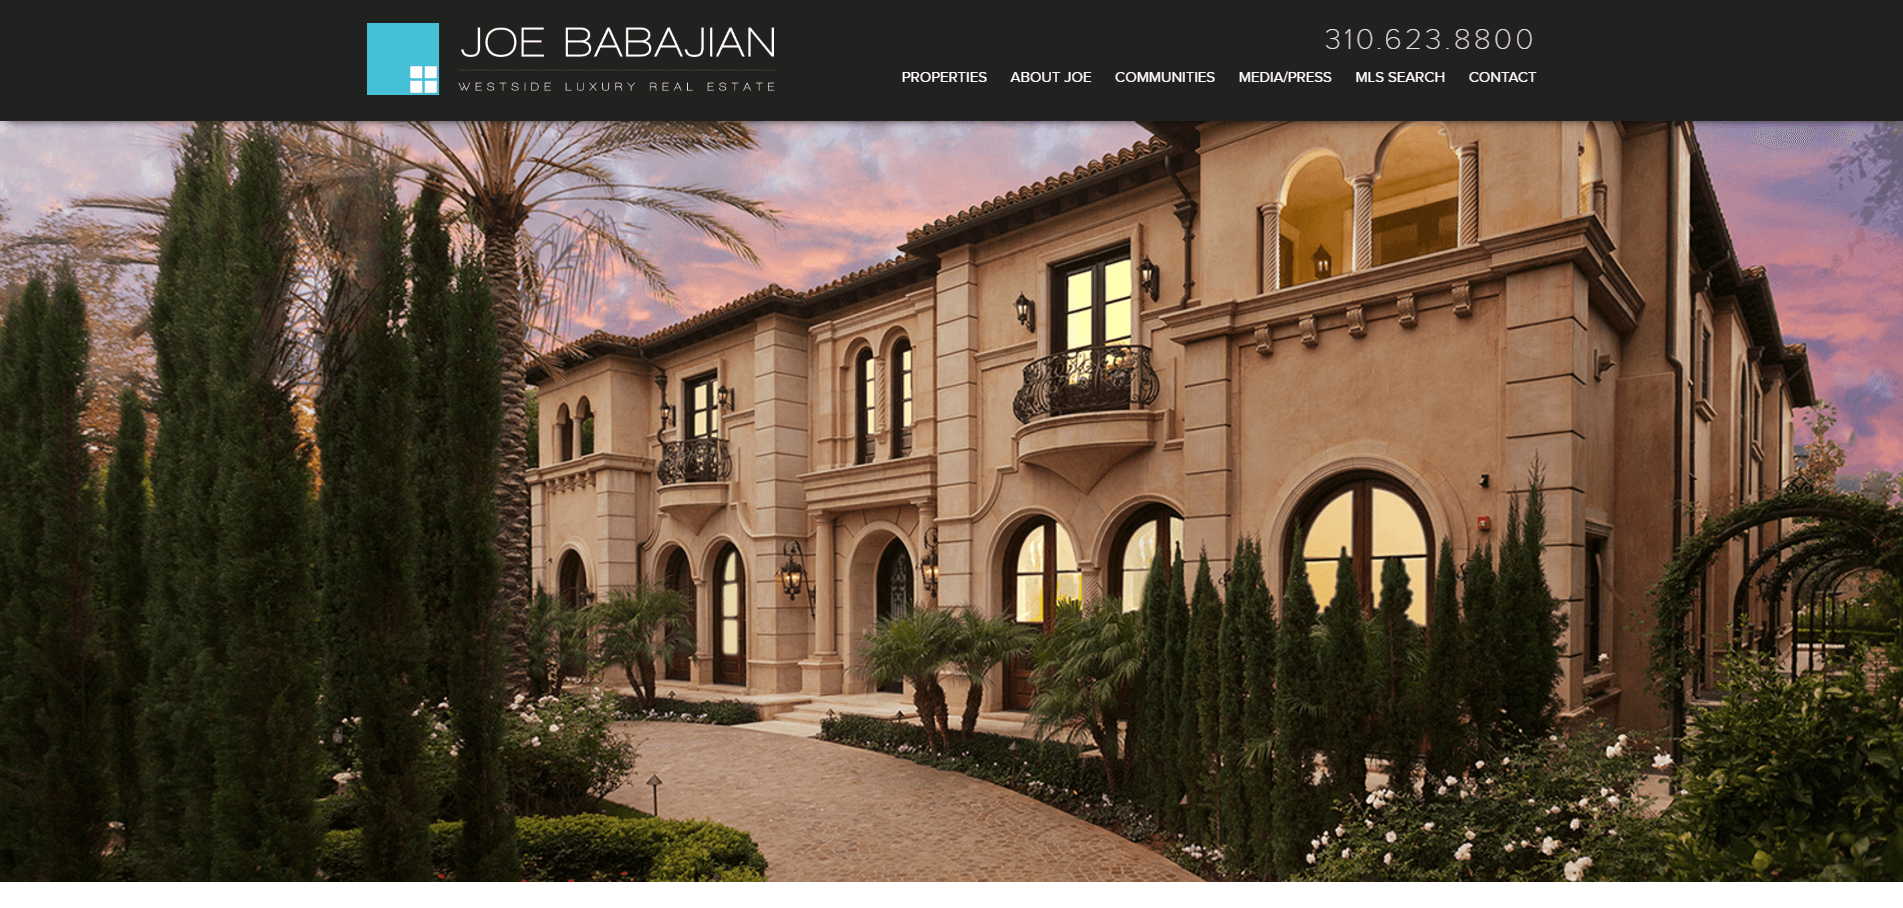  WOW!  We made a list of the 101 best real estate websites.  We ranked each site 1-101 and reviewed them all.  Here's joebabajian.com.  Who made the list? 